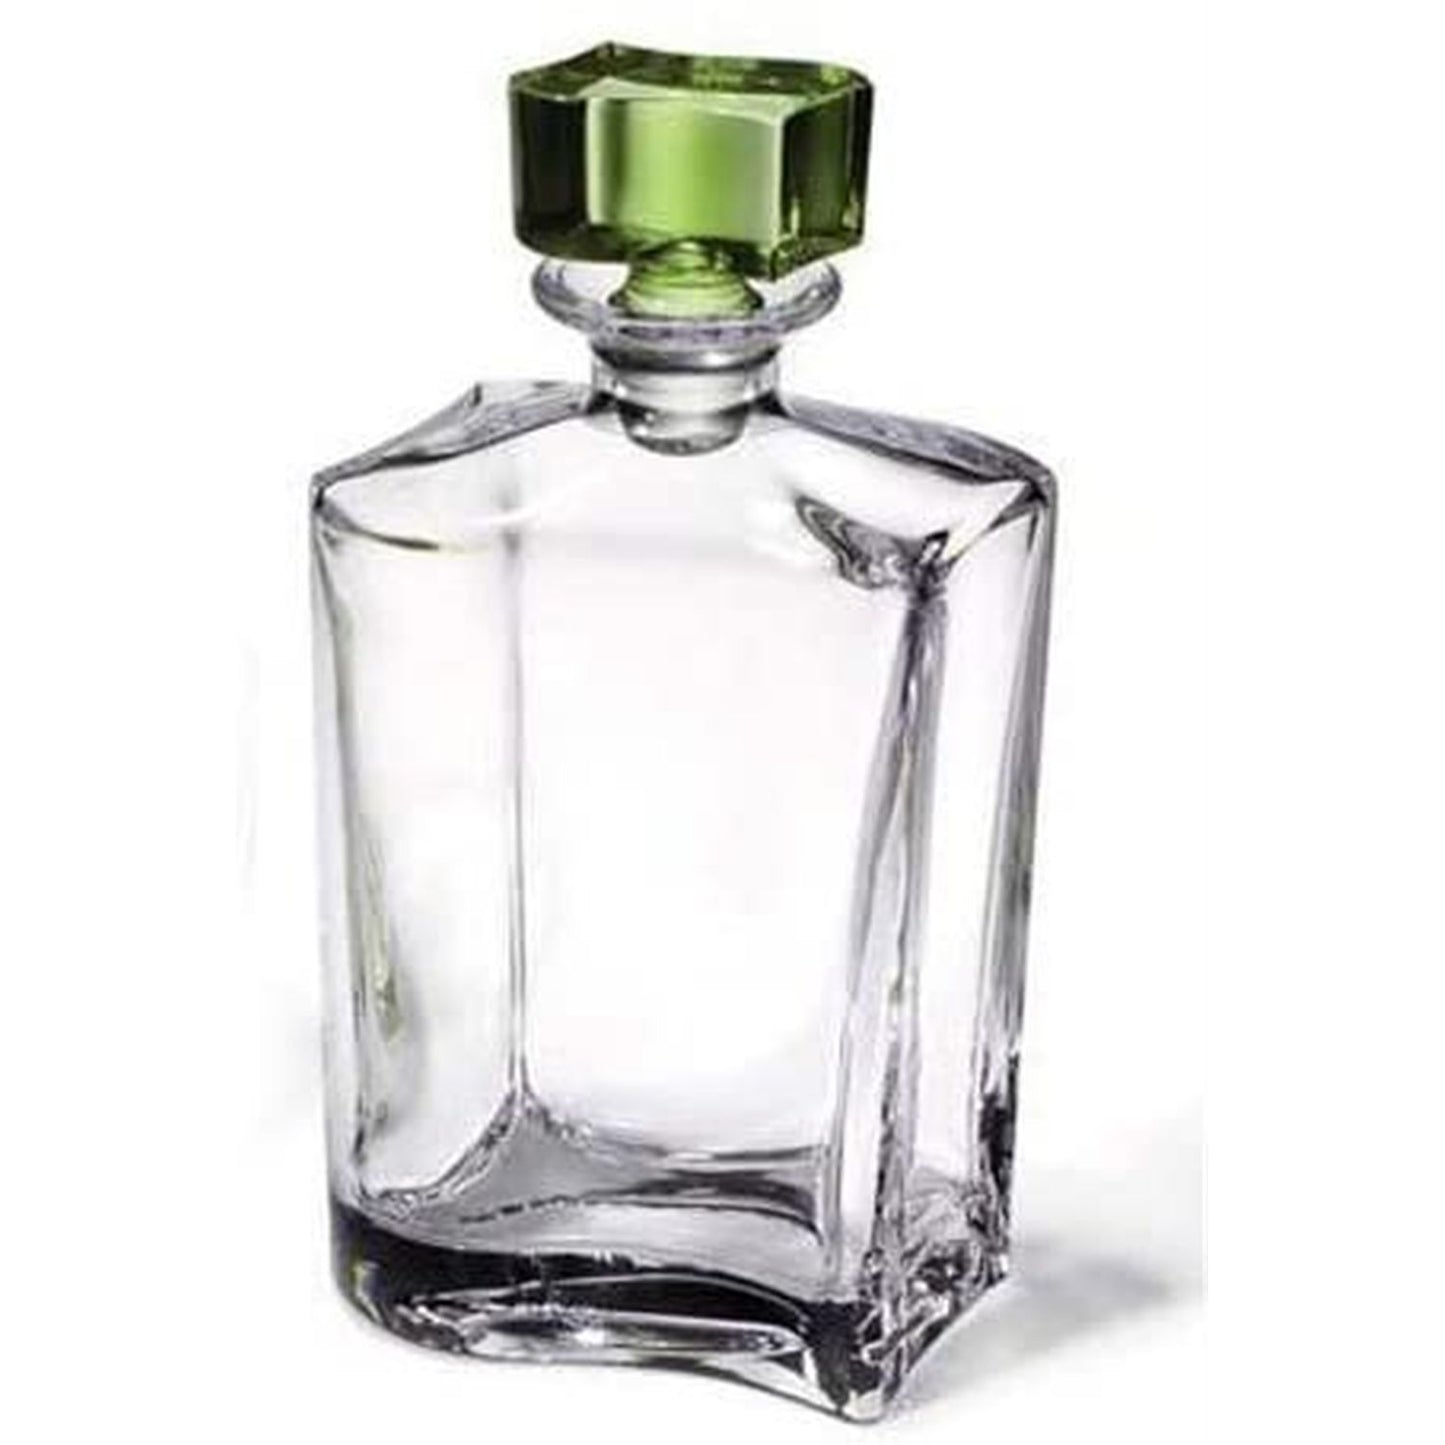 Macryl Crystal Hamilton Collection 20 oz Waves Decanter with Emerald Stopper.